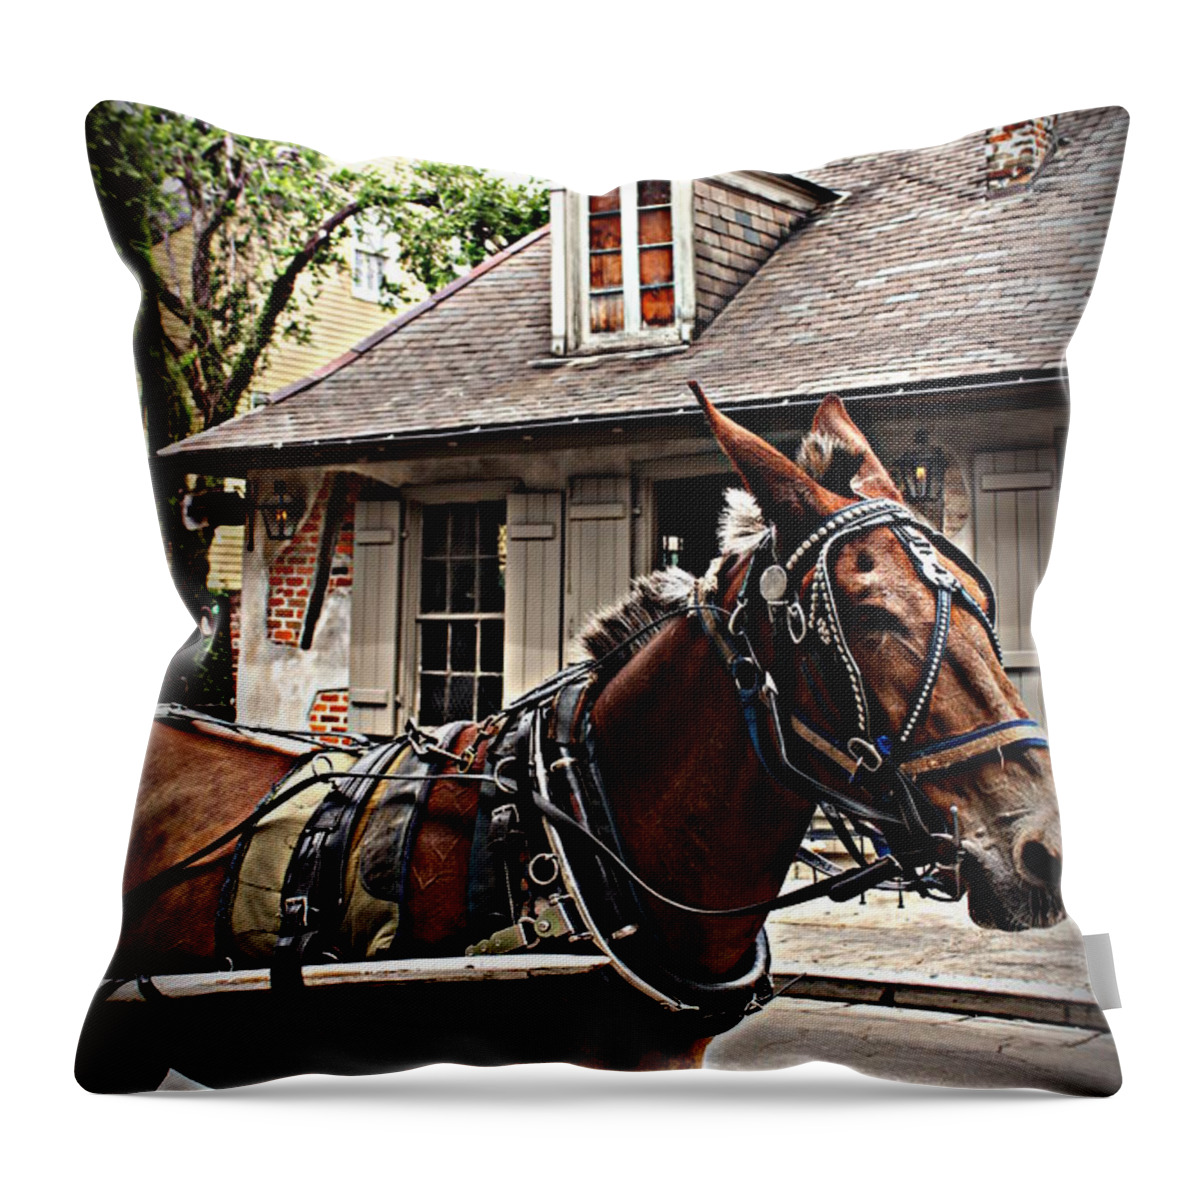 Carriage Ride Throw Pillow featuring the photograph Carriage Ride by Beth Vincent